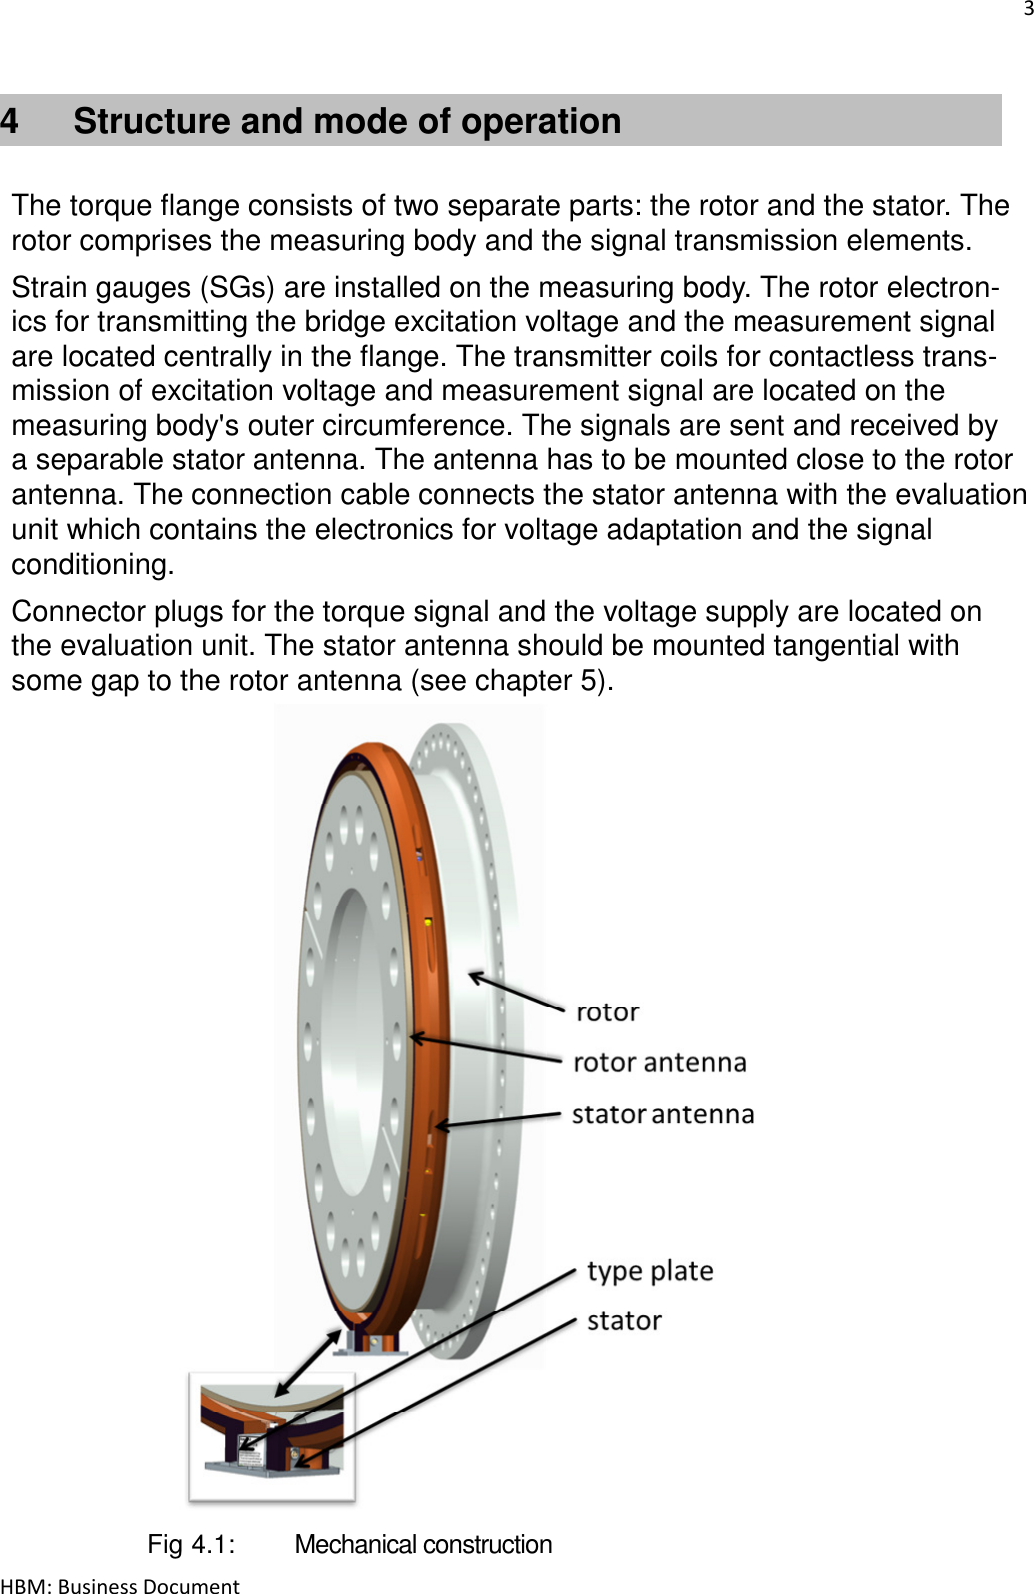 3  HBM: Business Document 4  Structure and mode of operation   The torque flange consists of two separate parts: the rotor and the stator. The rotor comprises the measuring body and the signal transmission elements.  Strain gauges (SGs) are installed on the measuring body. The rotor electron- ics for transmitting the bridge excitation voltage and the measurement signal are located centrally in the flange. The transmitter coils for contactless trans- mission of excitation voltage and measurement signal are located on the measuring body&apos;s outer circumference. The signals are sent and received by a separable stator antenna. The antenna has to be mounted close to the rotor antenna. The connection cable connects the stator antenna with the evaluation unit which contains the electronics for voltage adaptation and the signal conditioning.  Connector plugs for the torque signal and the voltage supply are located on the evaluation unit. The stator antenna should be mounted tangential with some gap to the rotor antenna (see chapter 5).                          Fig 4.1:   Mechanical construction 